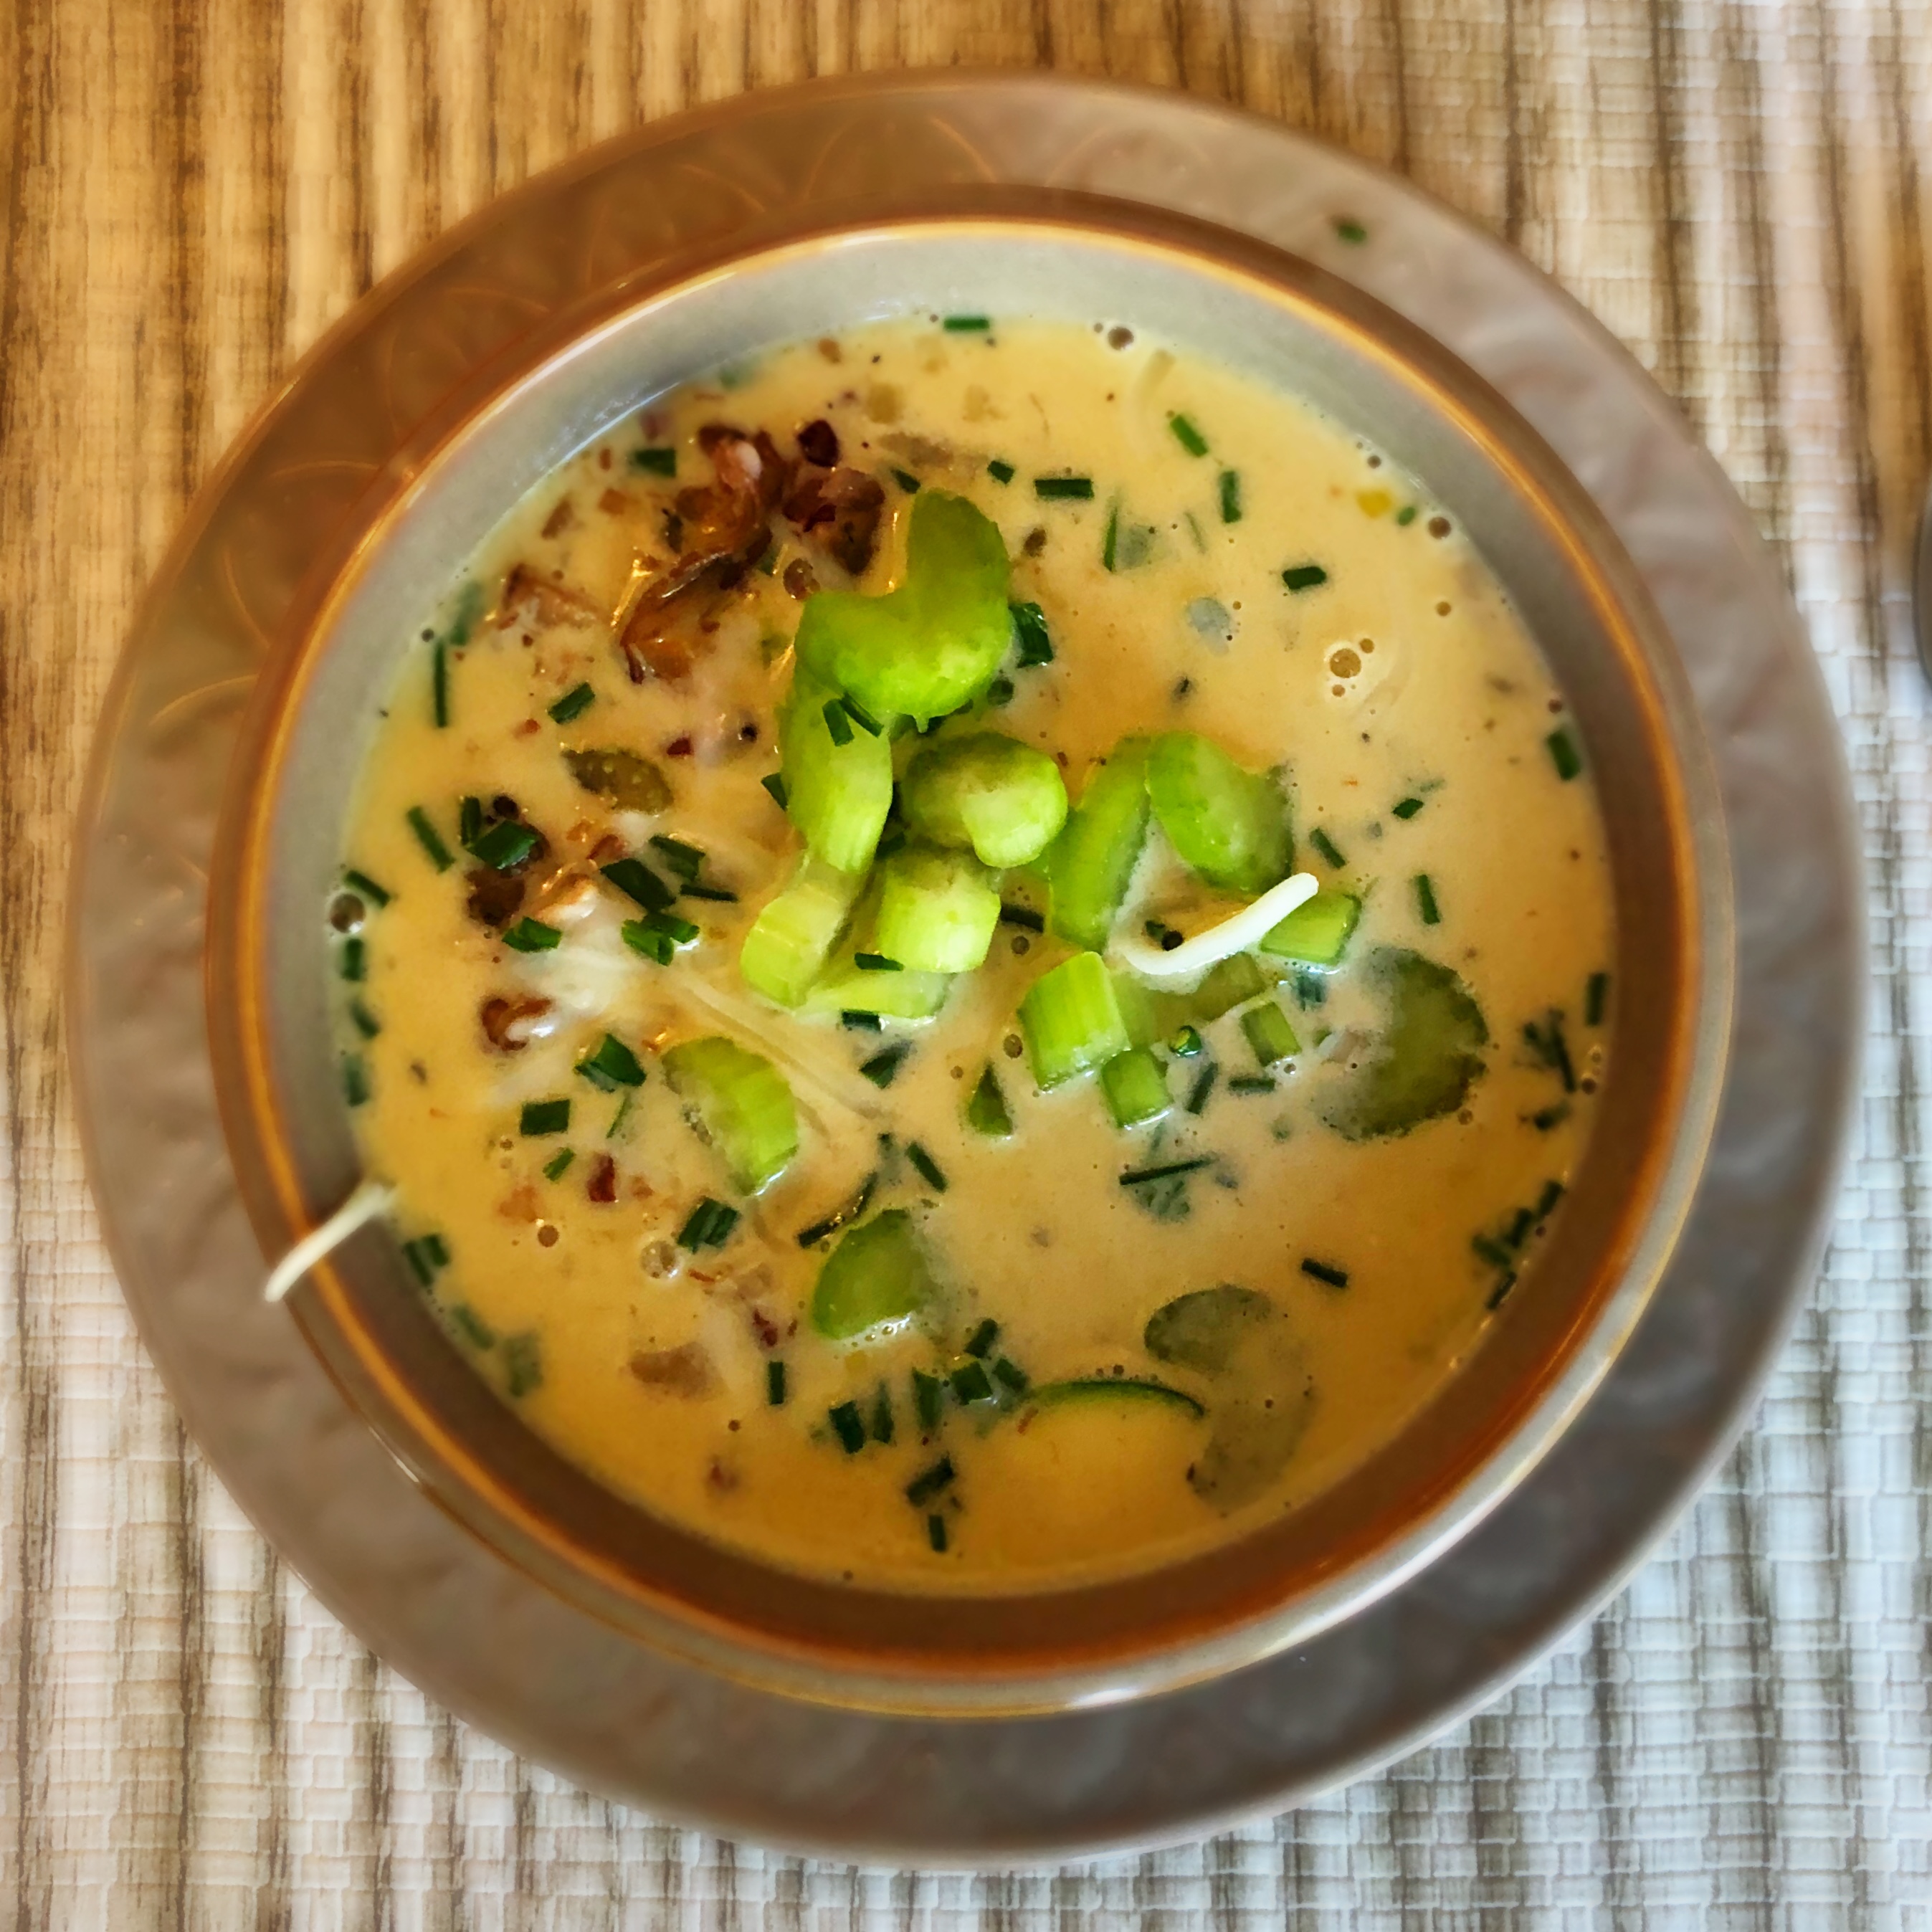 Buster reccomend Asian recipe with seafood broth